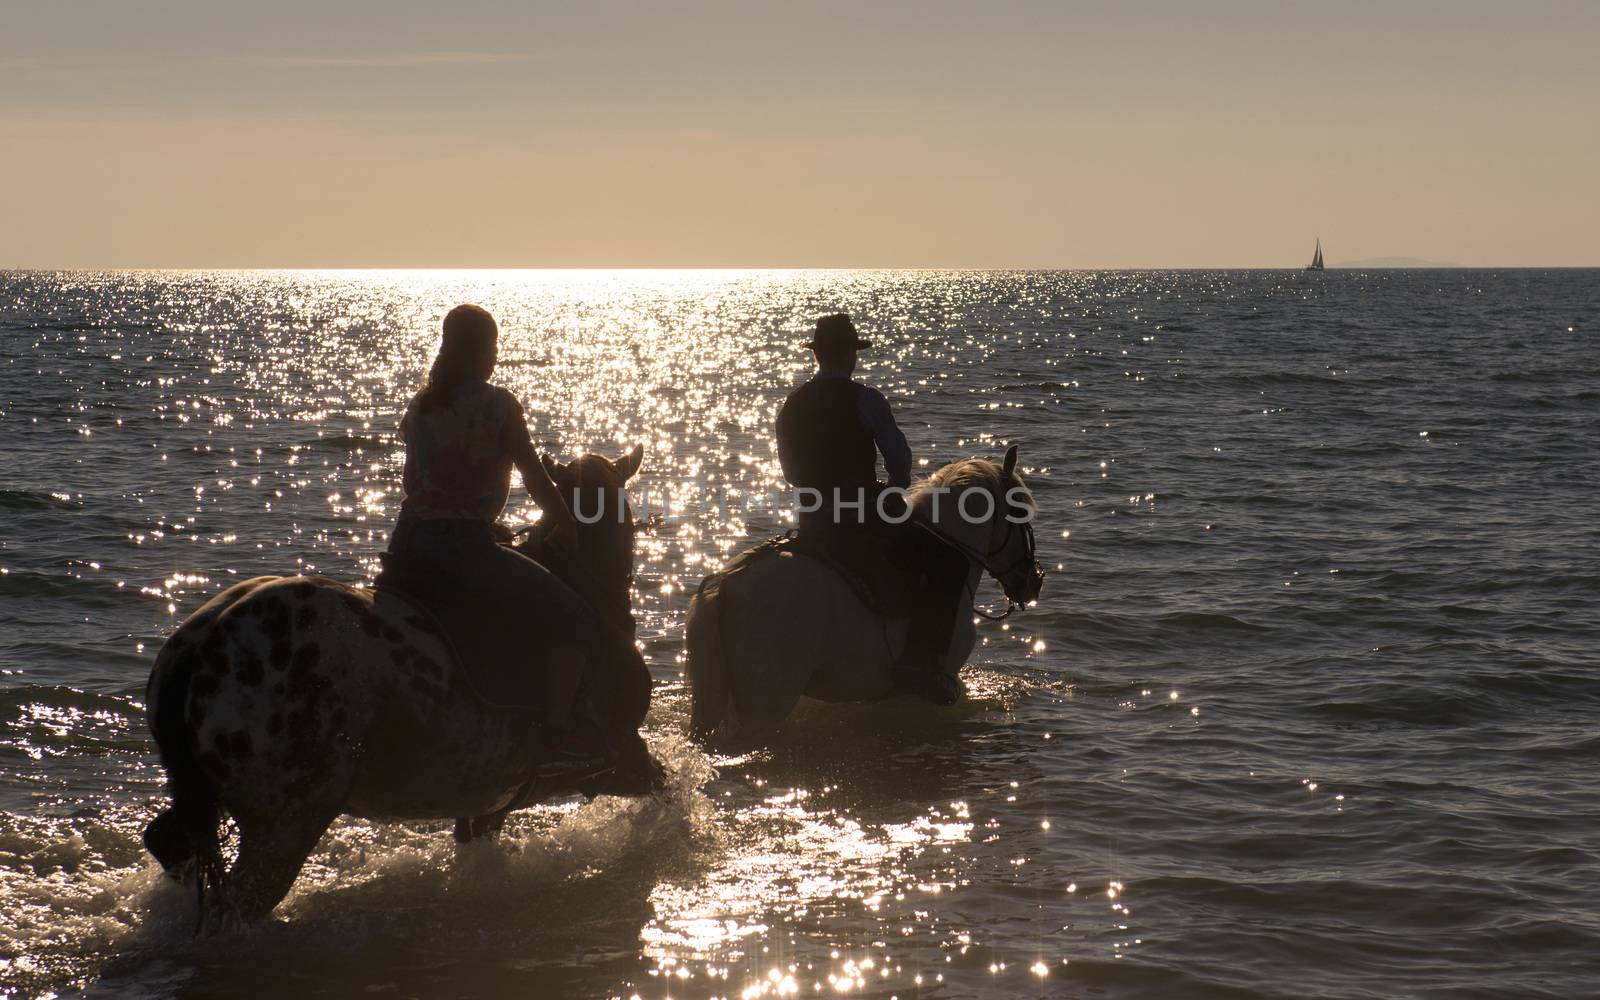 horse riders in the sea by cynoclub